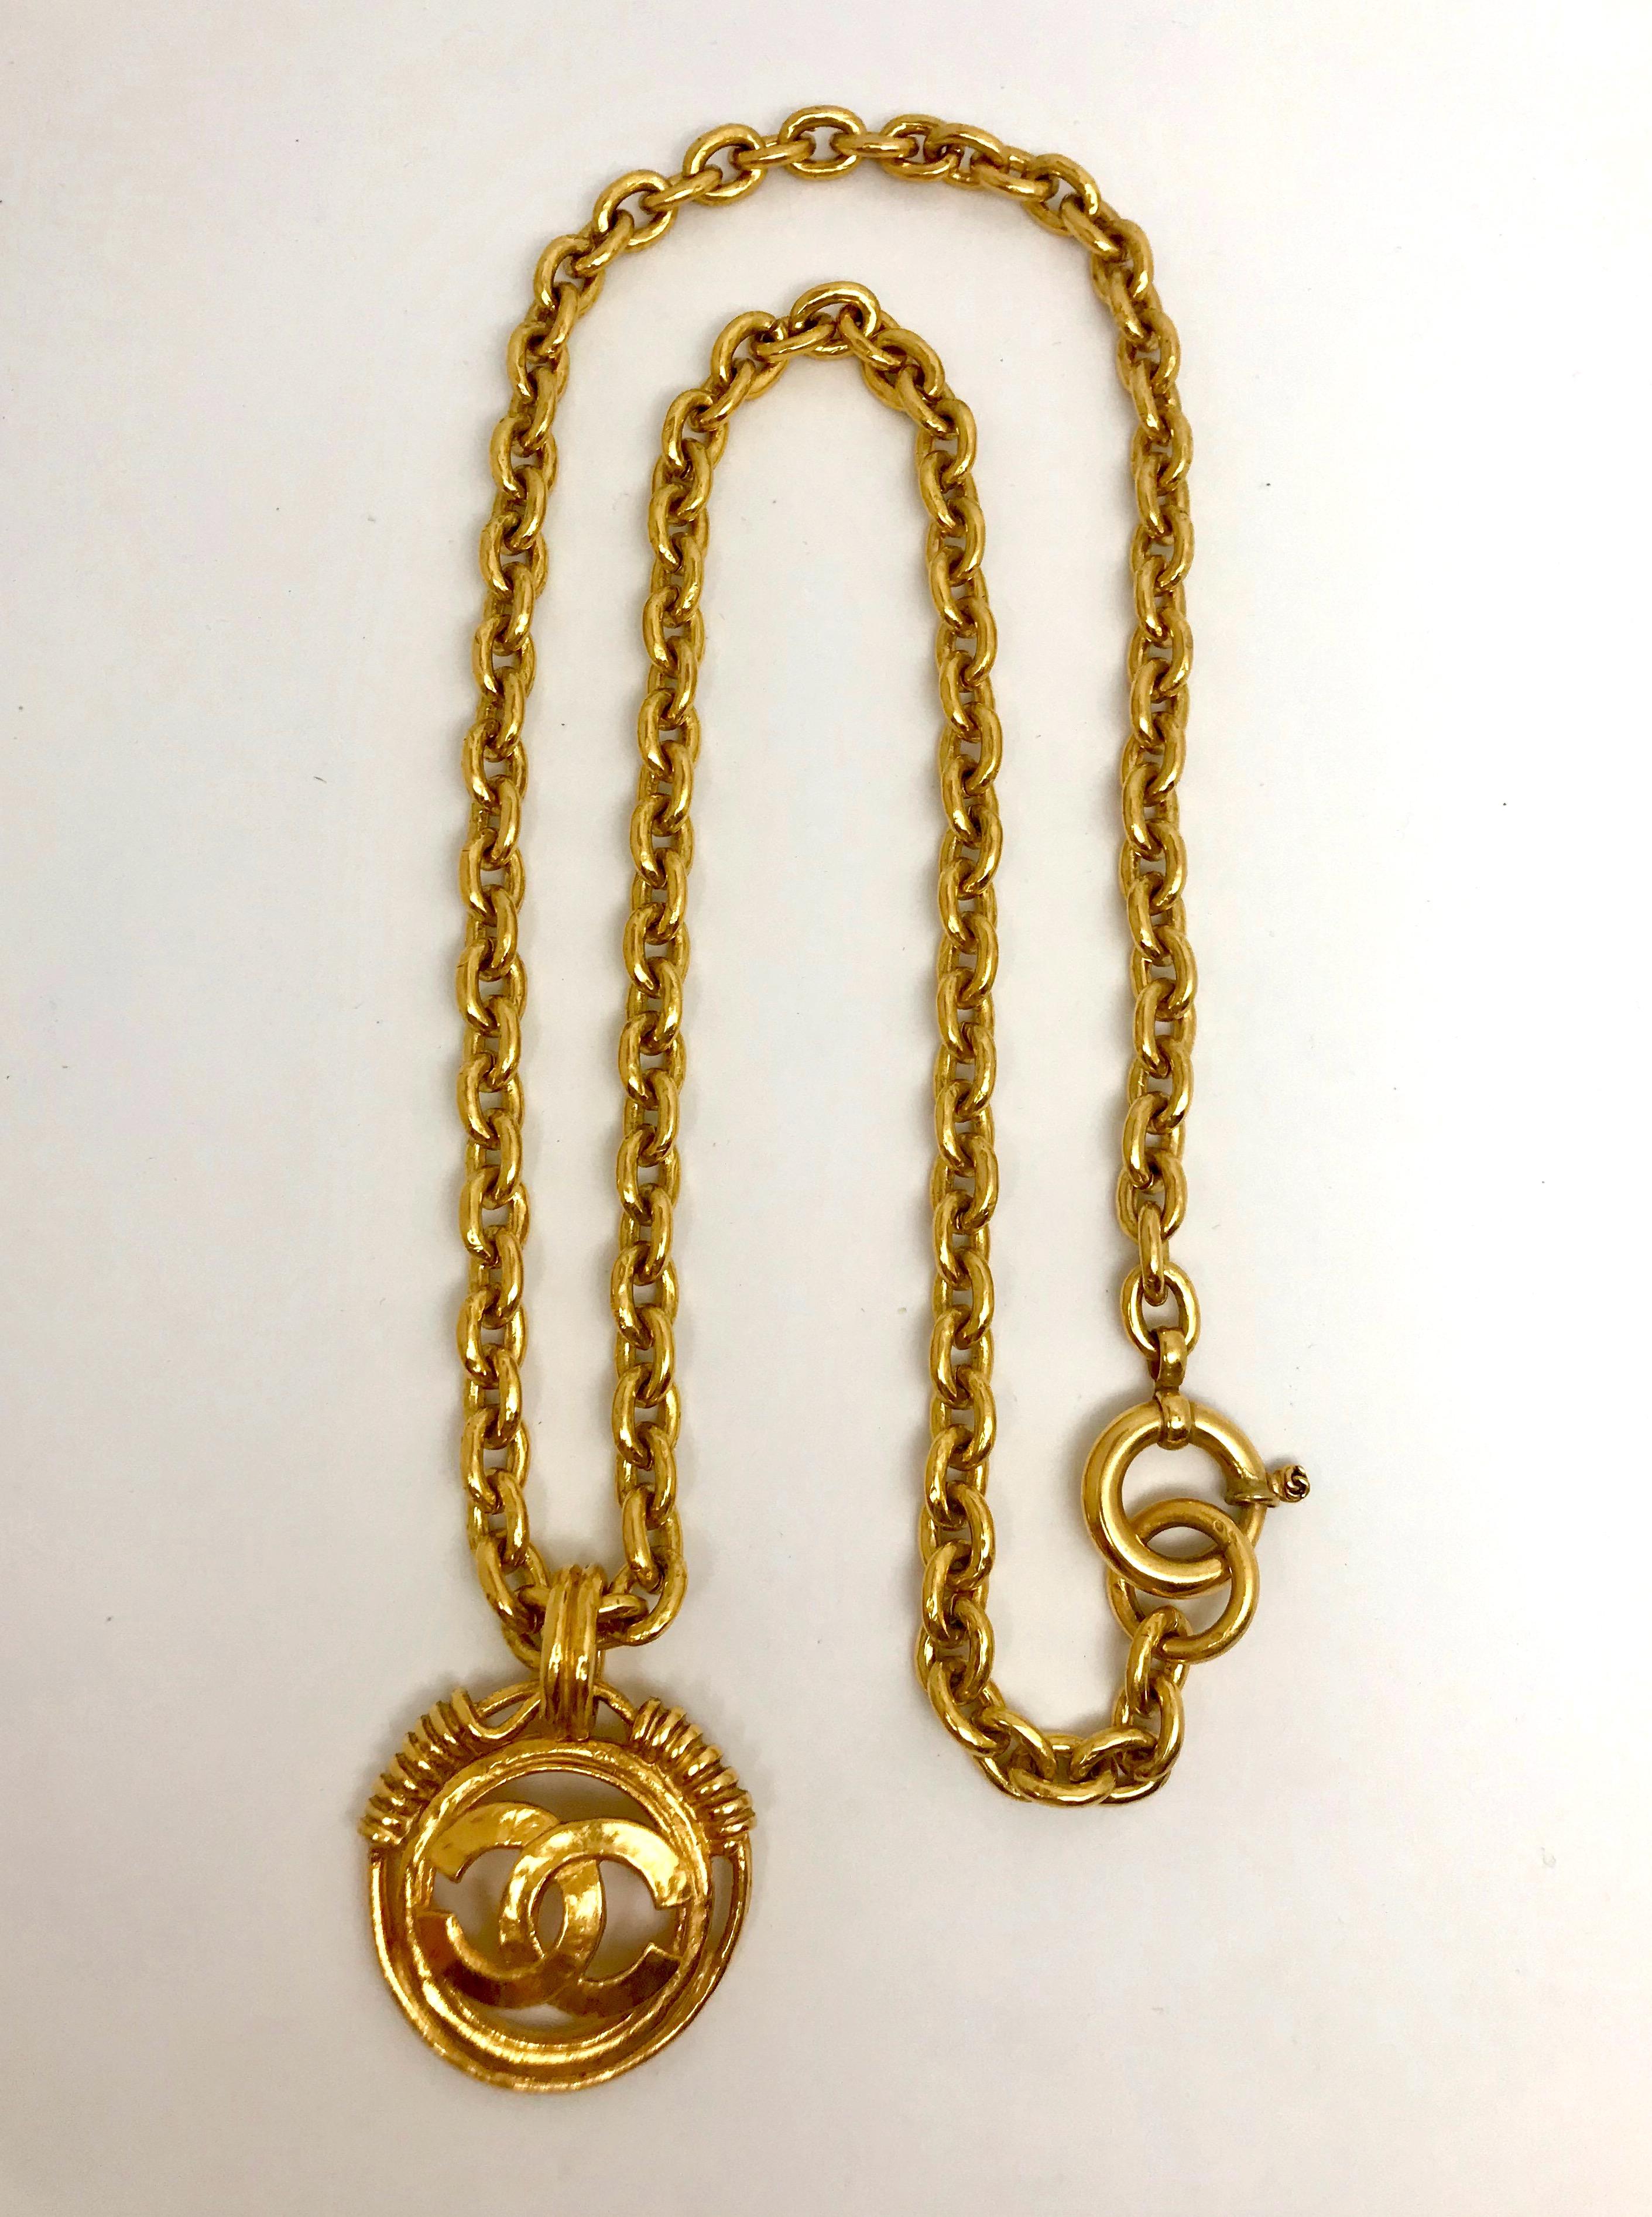 From the spring 1994 collection is this Chanel CC logo medallion pendant necklace with original rich gold patina. The round medallion measures 1.75